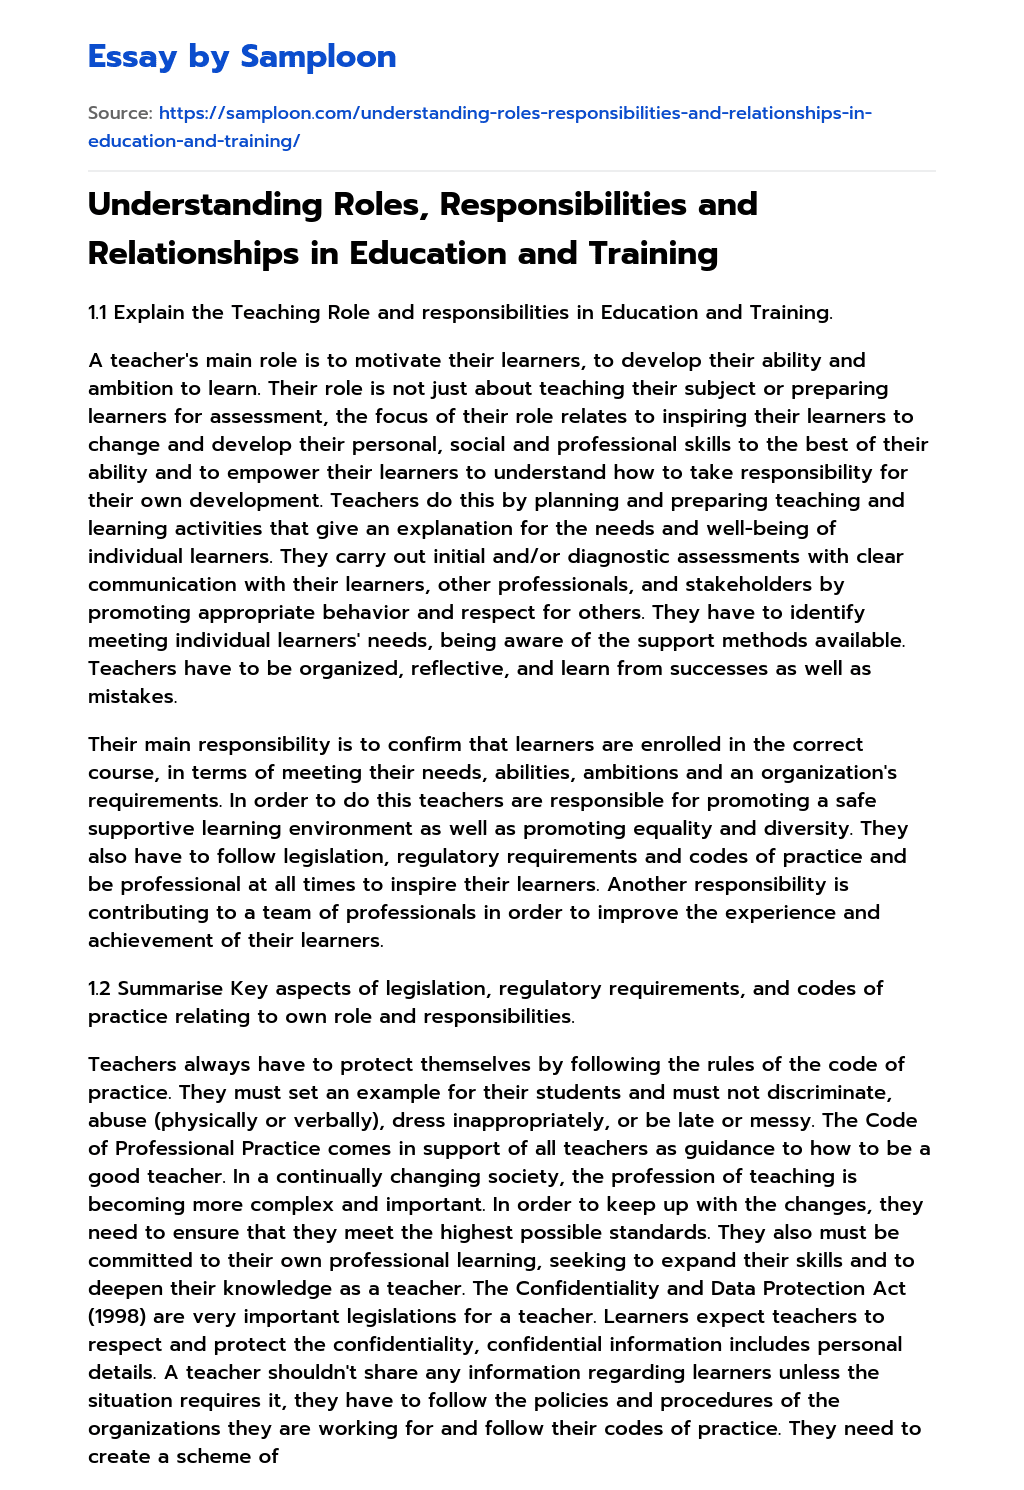 Understanding Roles, Responsibilities and Relationships in Education and Training essay